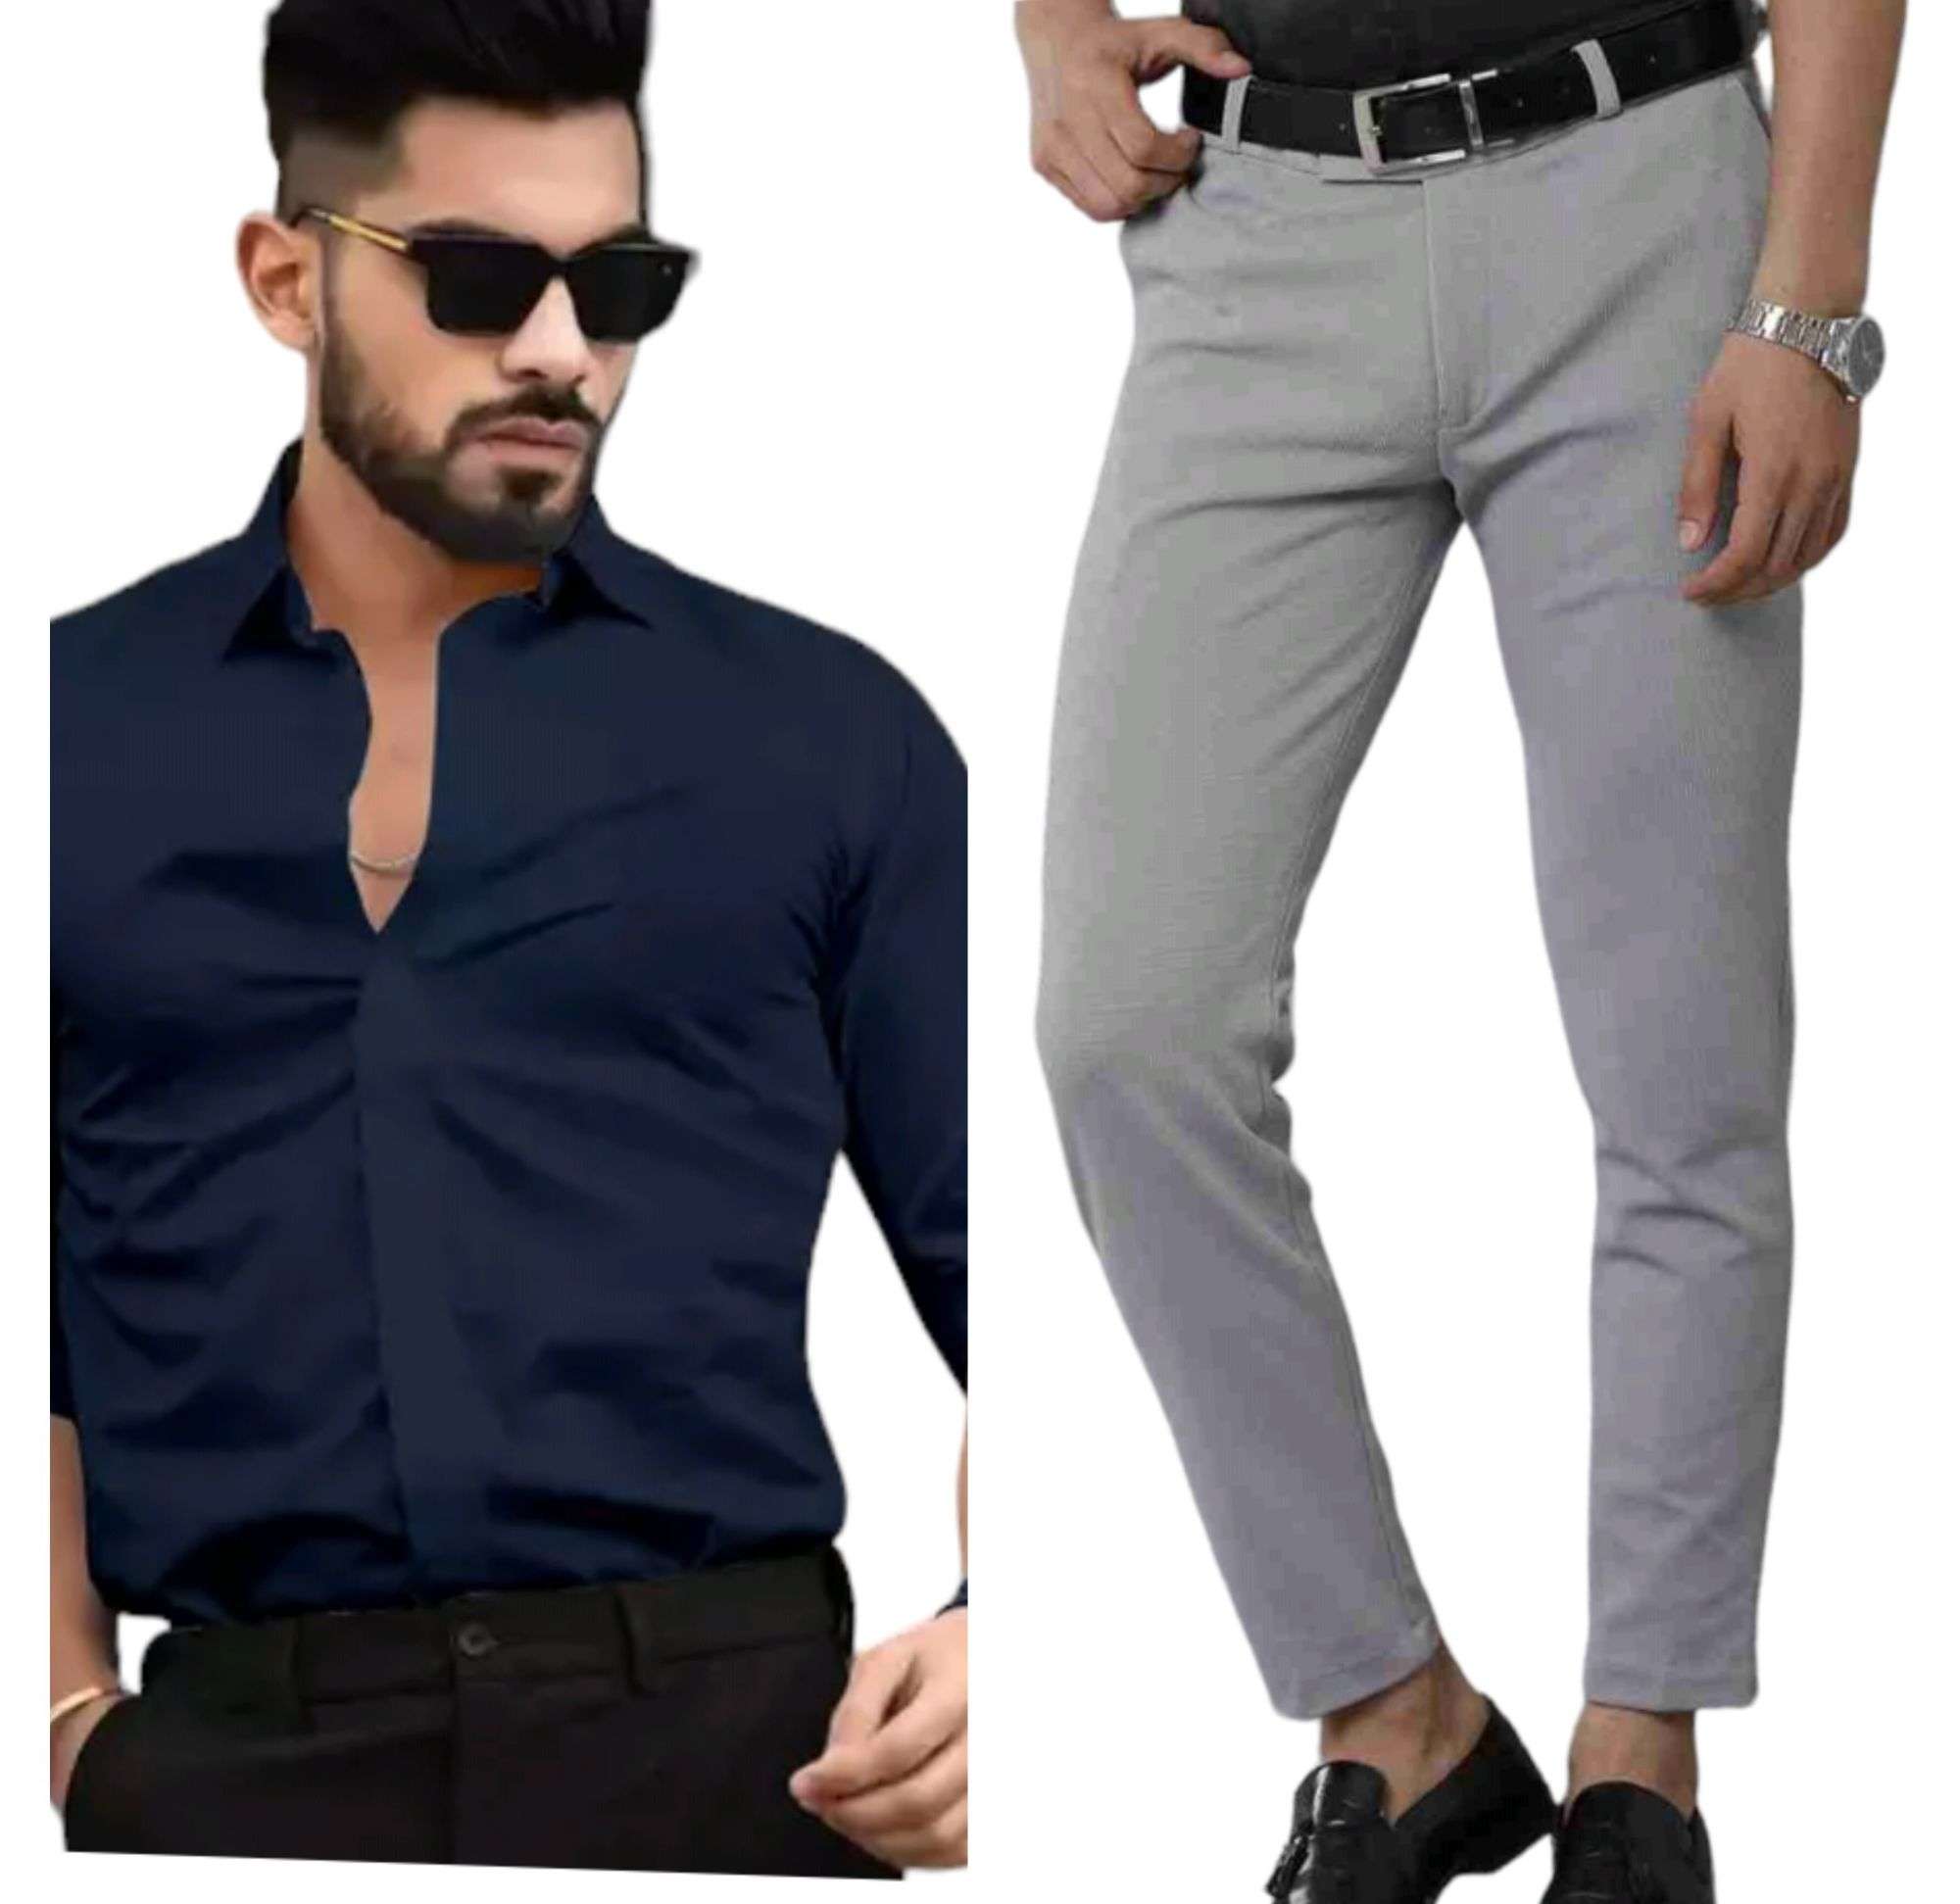 Oxemberg Mens Casual Trouser Price Starting From Rs 1,299/Unit. Find  Verified Sellers in Chandrapur - JdMart